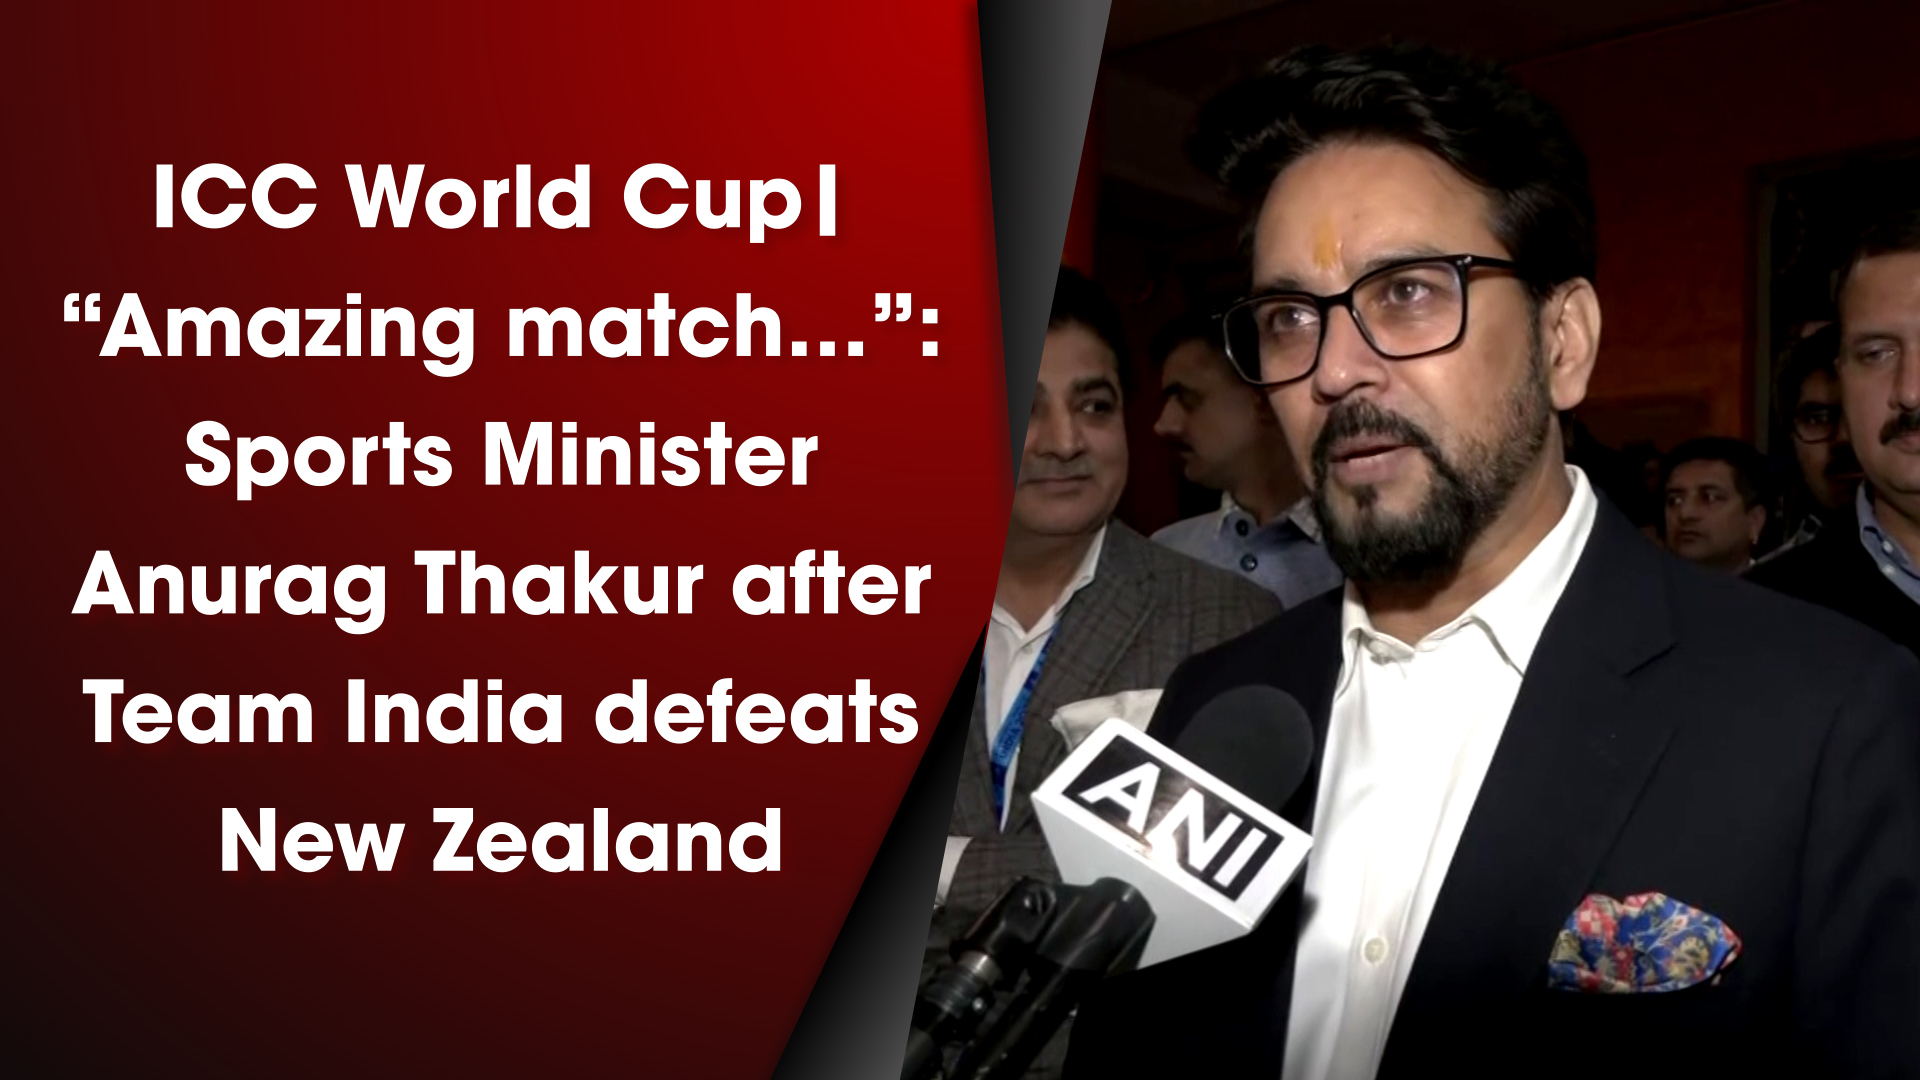 ICC World Cup `Amazing match`: Sports Minister Anurag Thakur after Team India defeats New Zealand